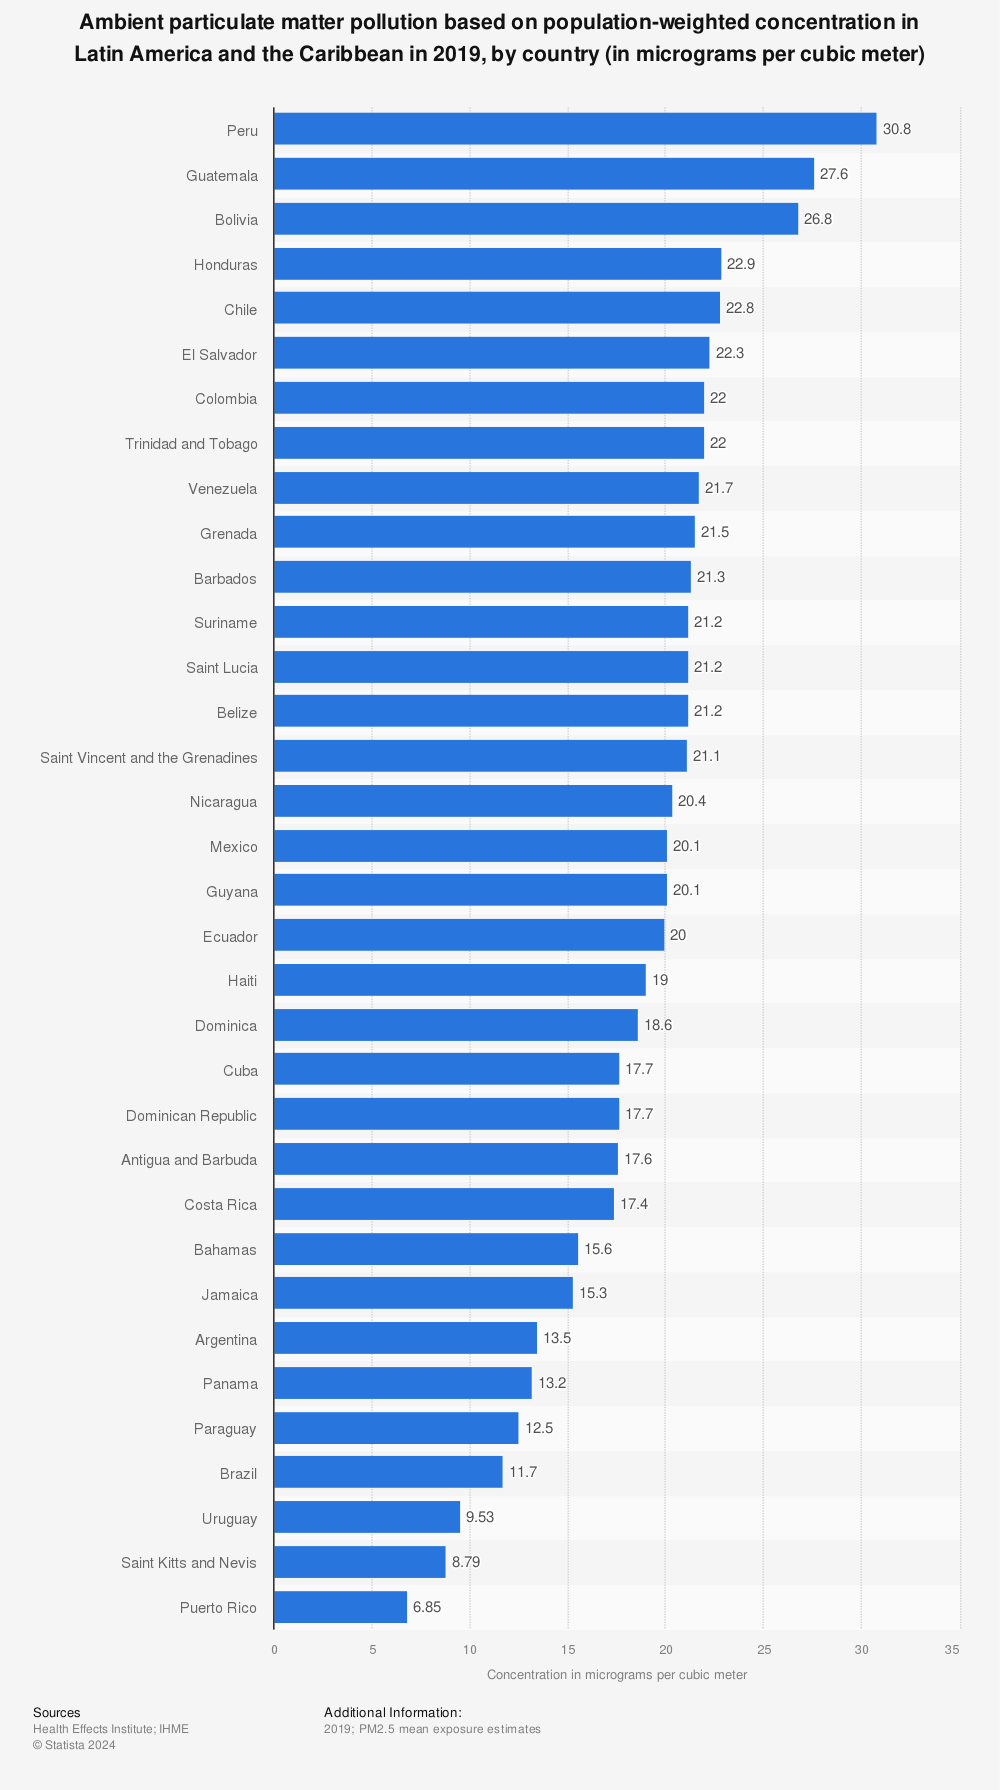 Statistic: Ambient particulate matter pollution based on population-weighted concentration in Latin America and the Caribbean in 2019, by country (in micrograms per cubic meter) | Statista